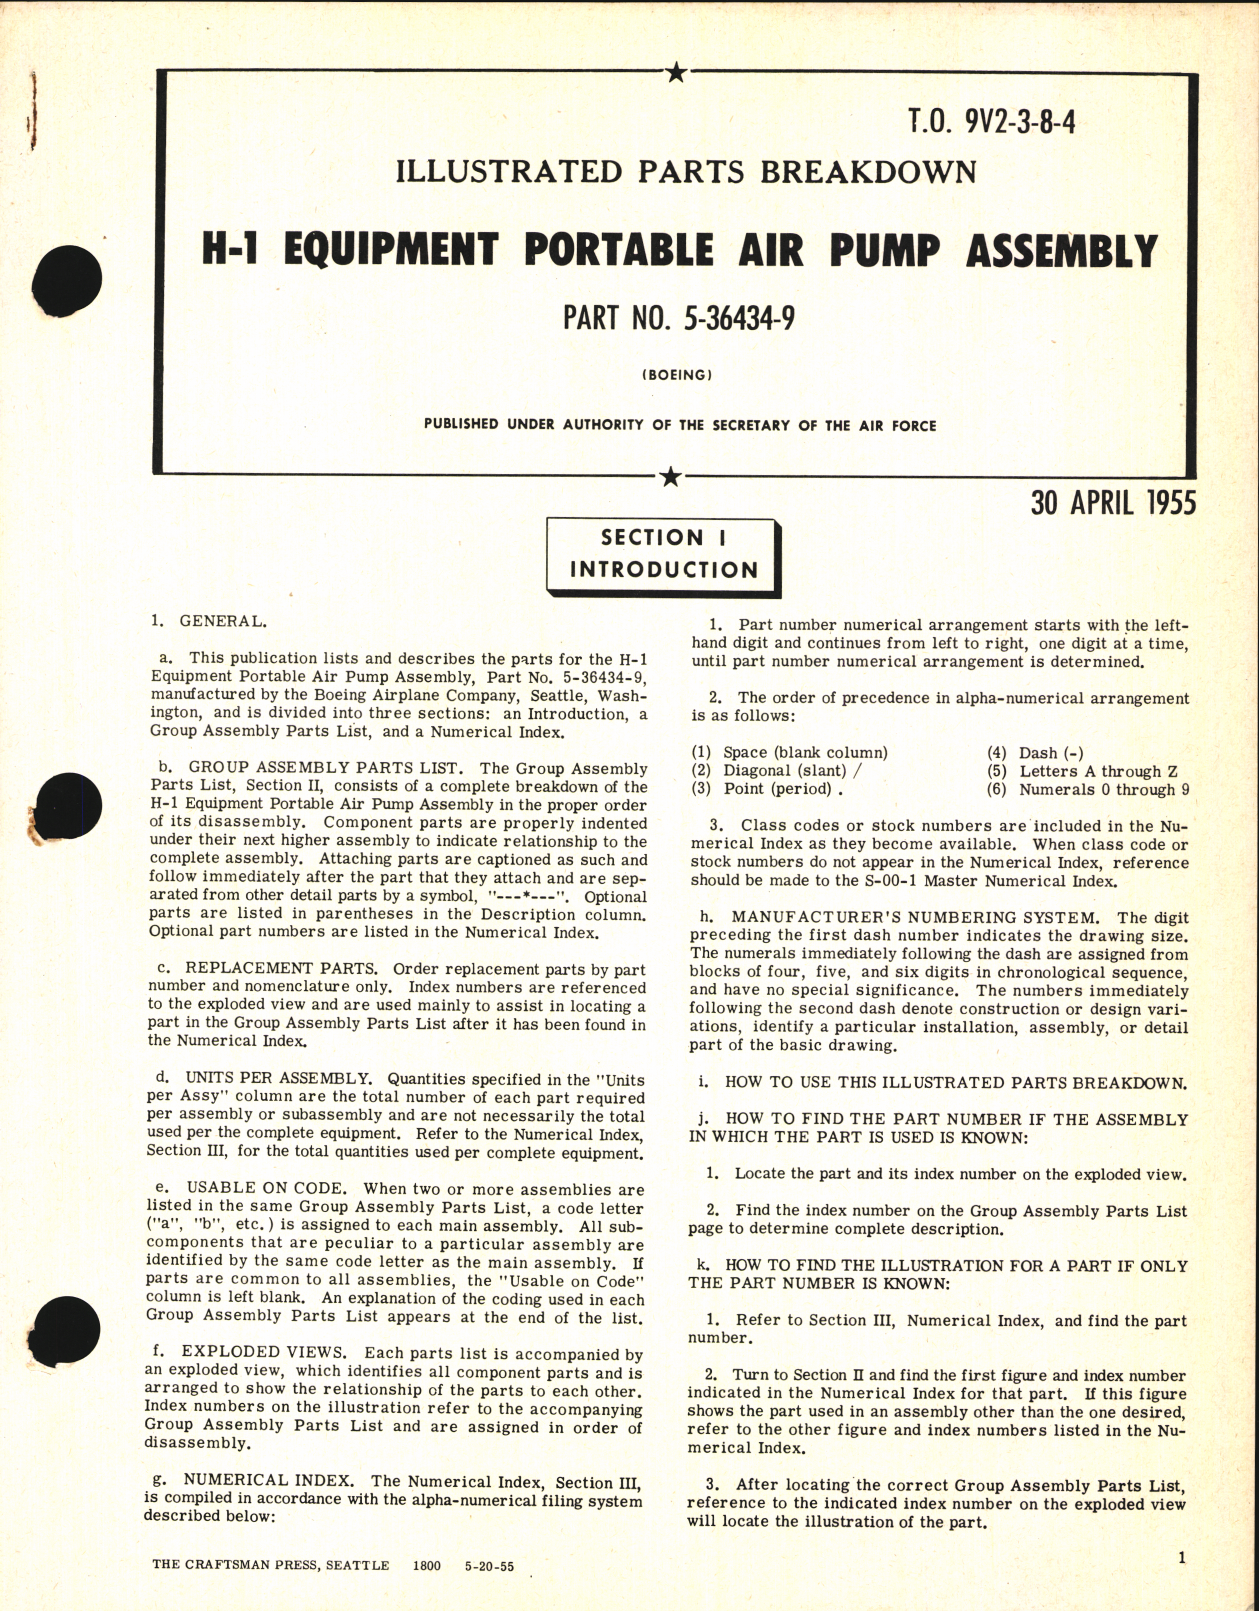 Sample page 1 from AirCorps Library document: Illustrated Parts Breakdown for H-1 Equipment Portable Air Pump Assembly Part No. 5-36434-9